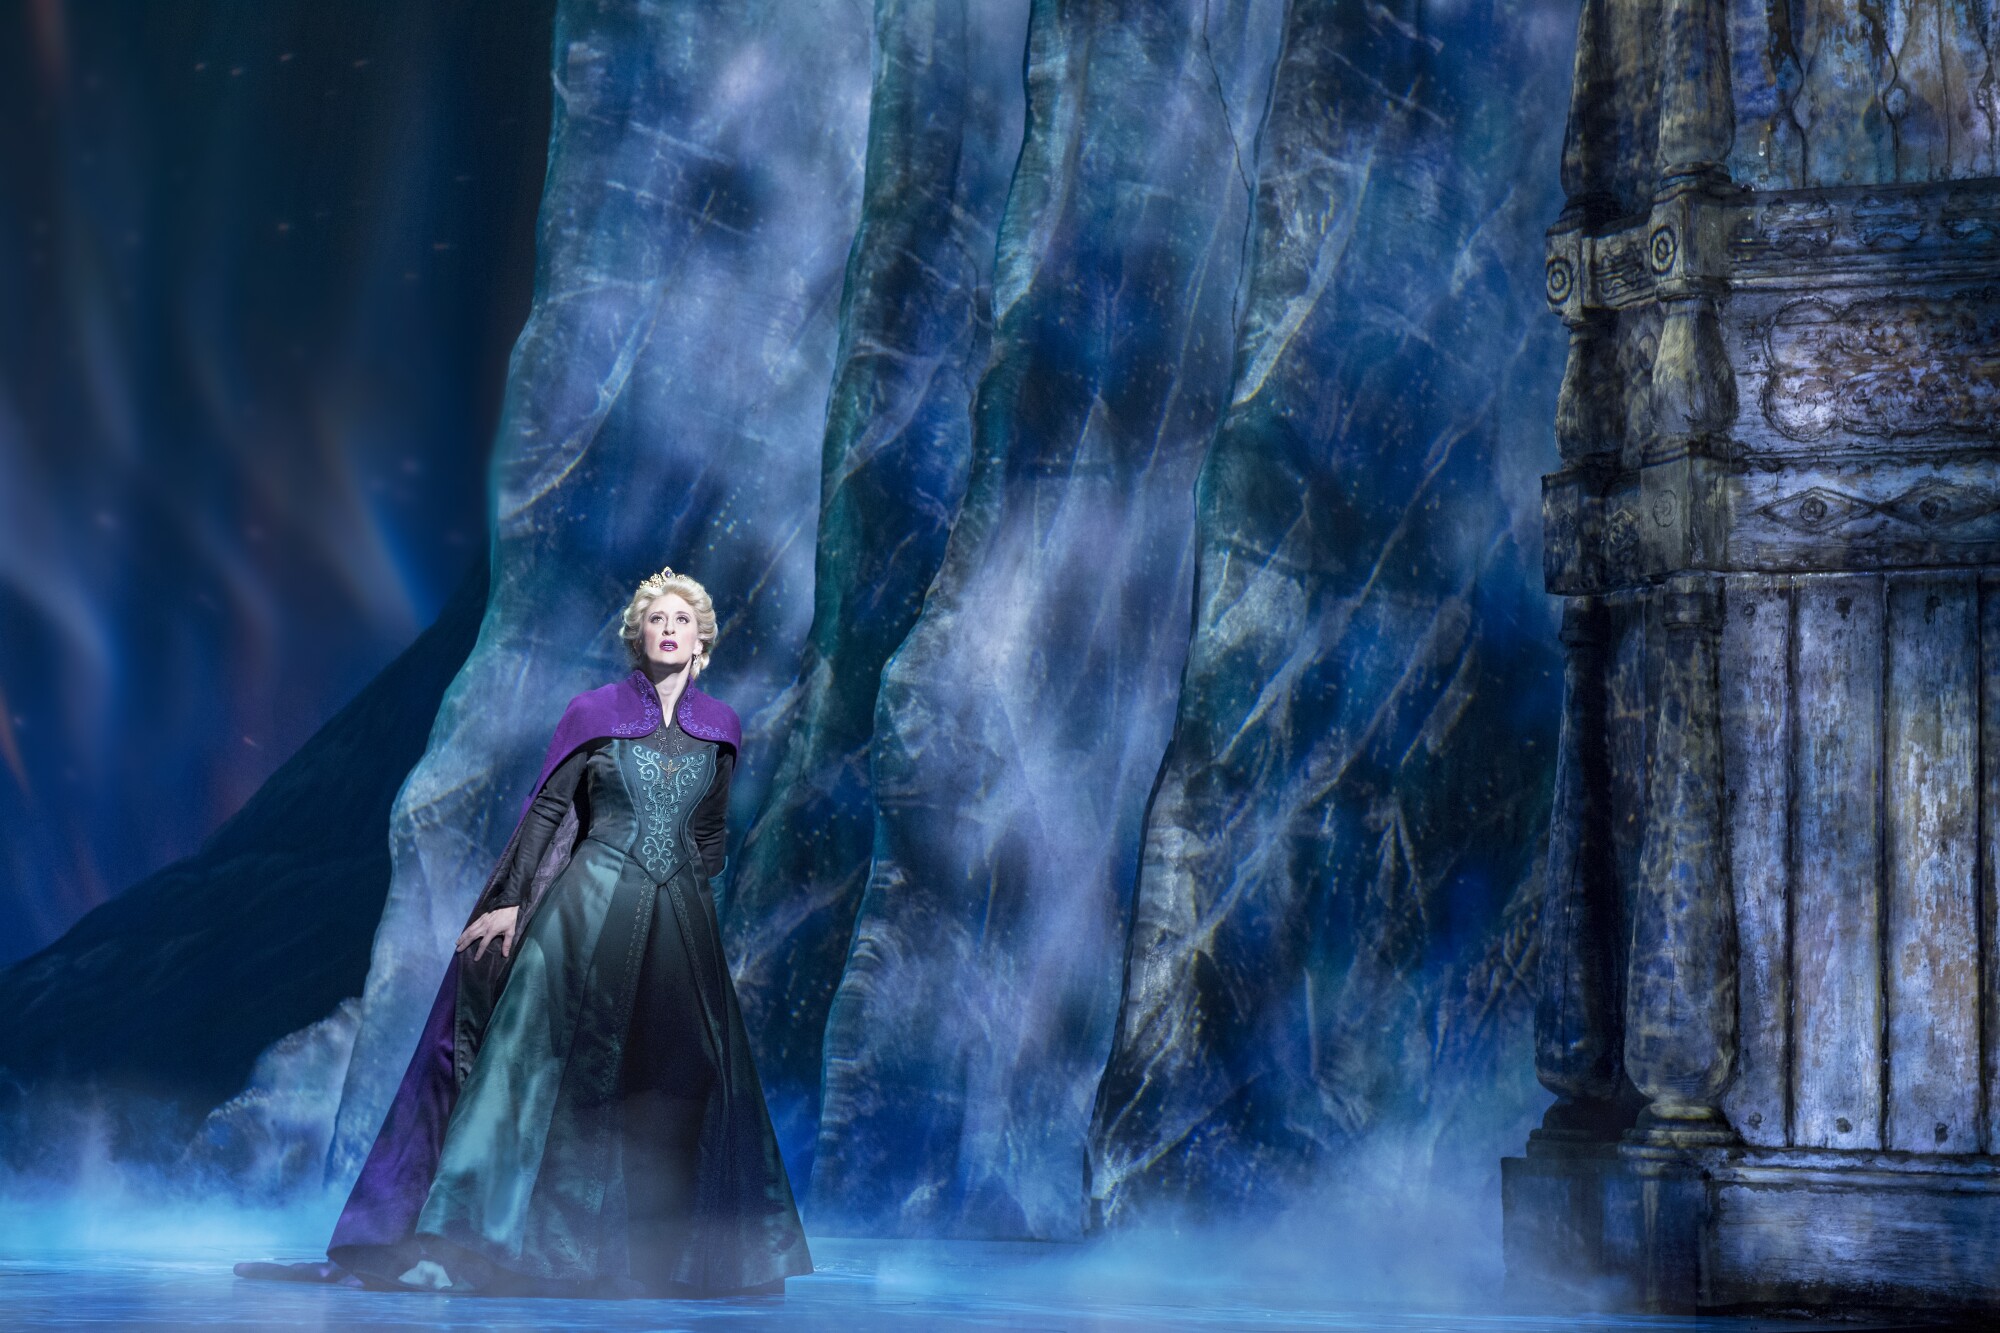 Projection design brought Elsa's (Caissie Levy on Broadway) powers to life onstage in "Frozen."